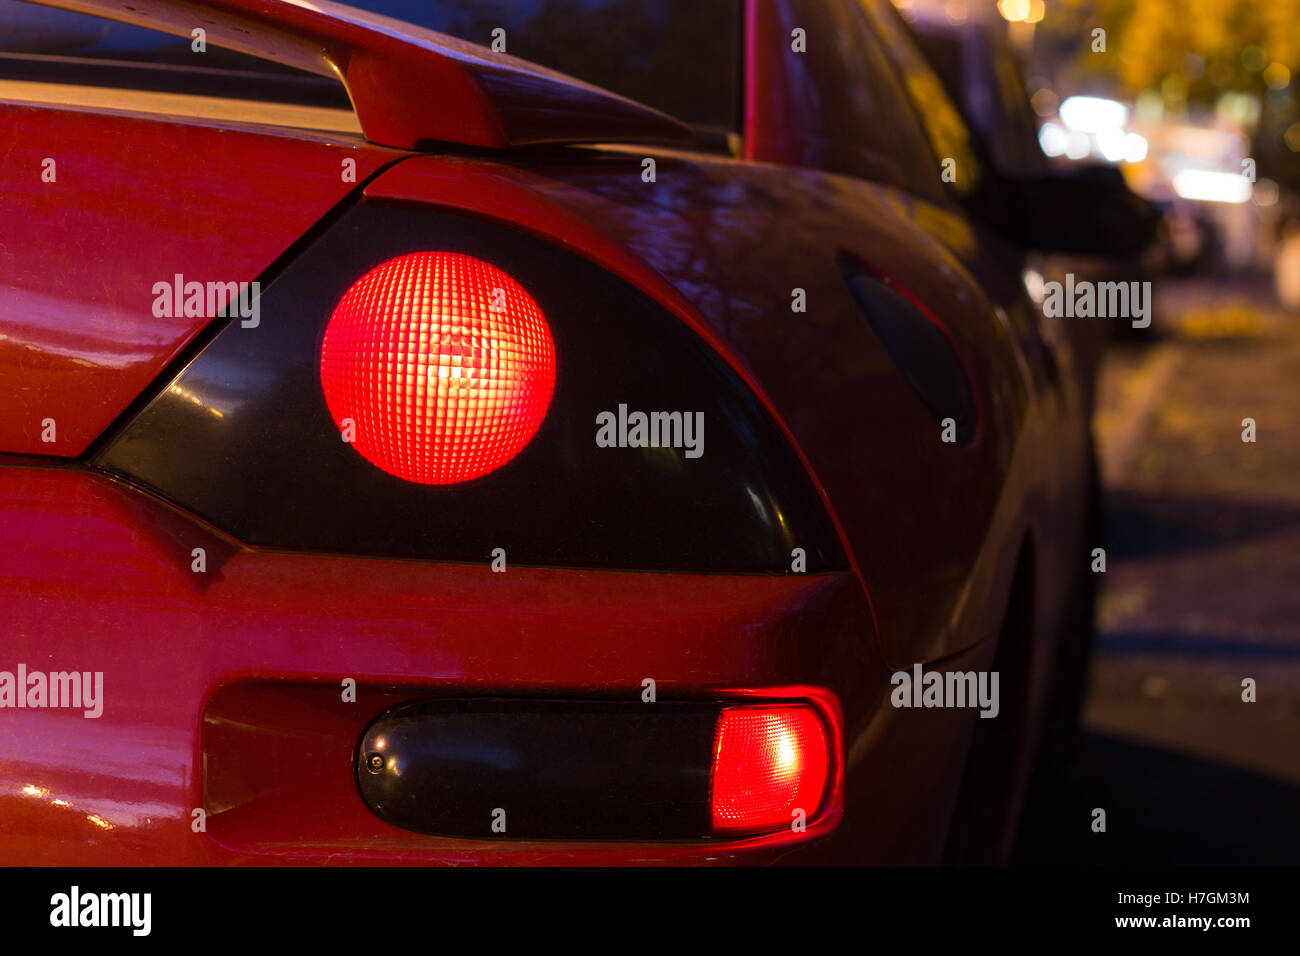 Red sports car glowing Back Lights Stock Photo